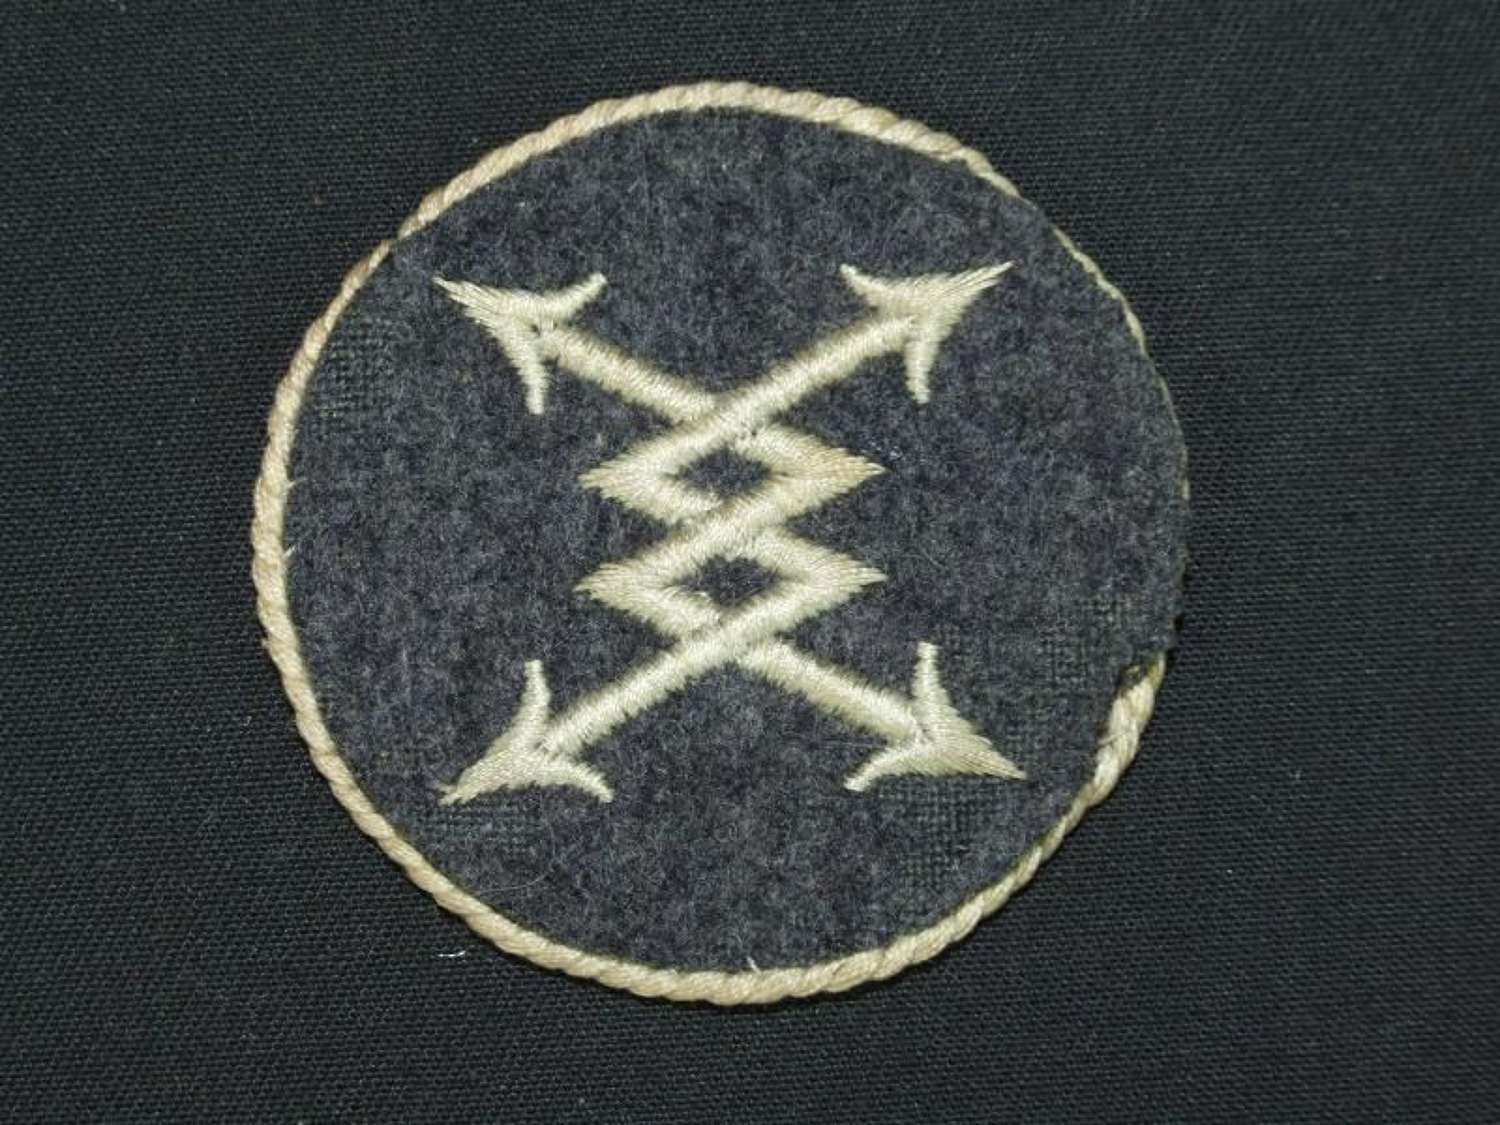 Luftwaffe Trade Specialist Badge - Qualified Telephone Operator